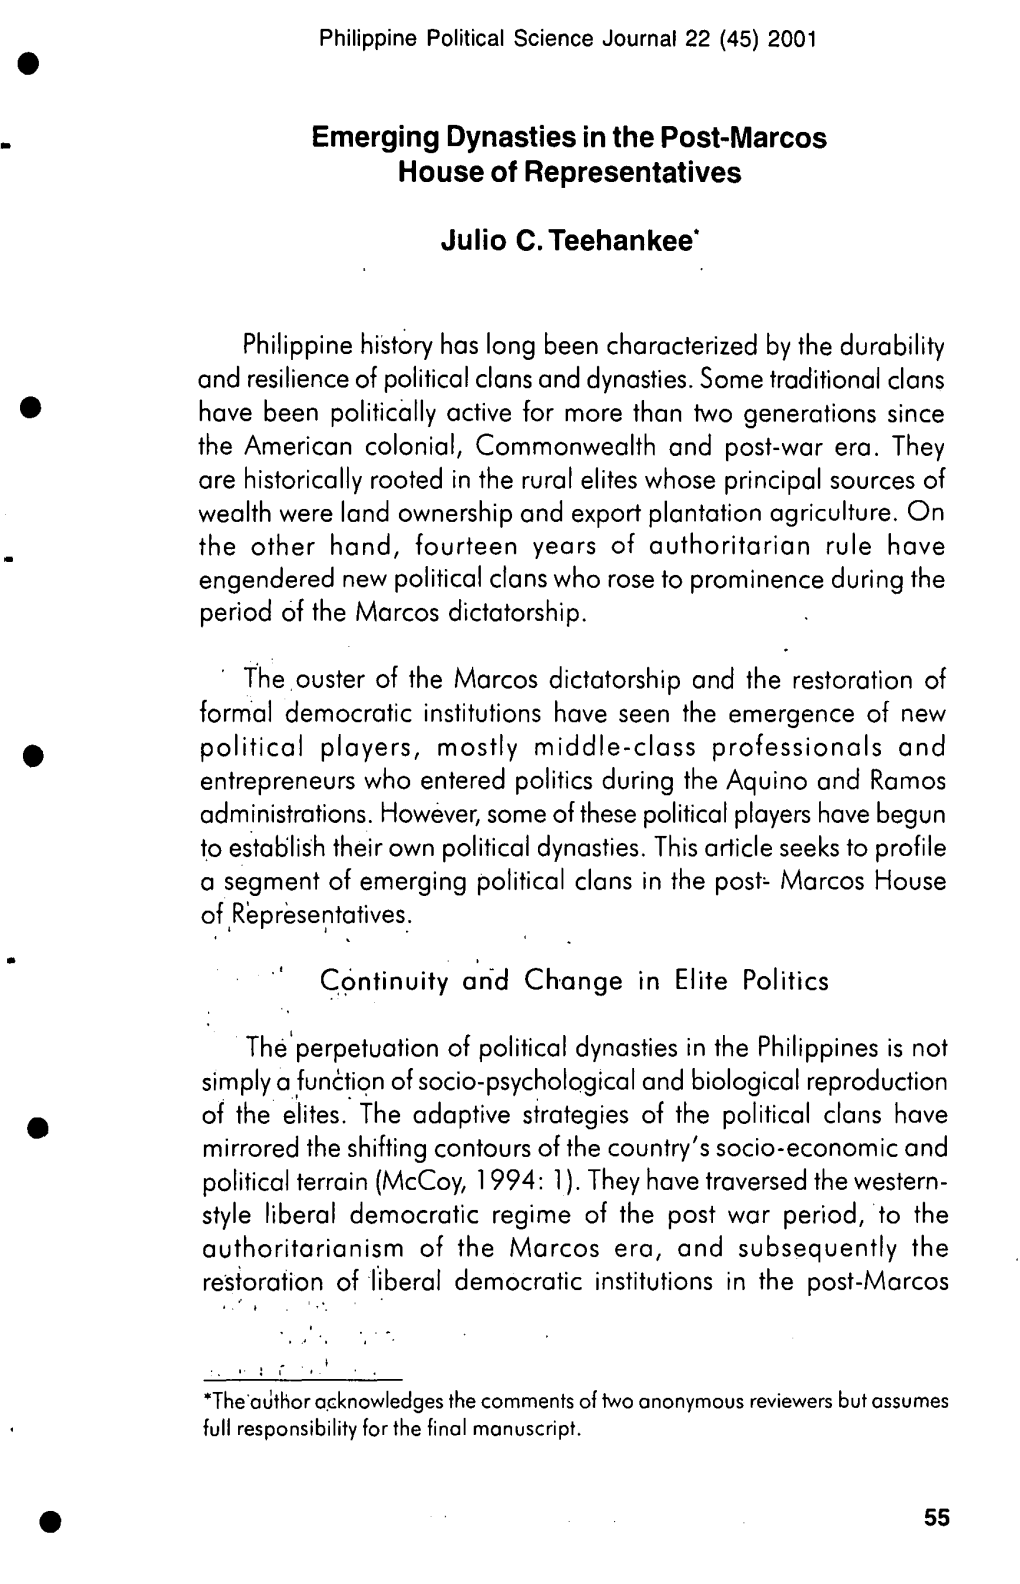 07 Emerging Dynasties in the Post-Marcos House of Representatives.Pdf